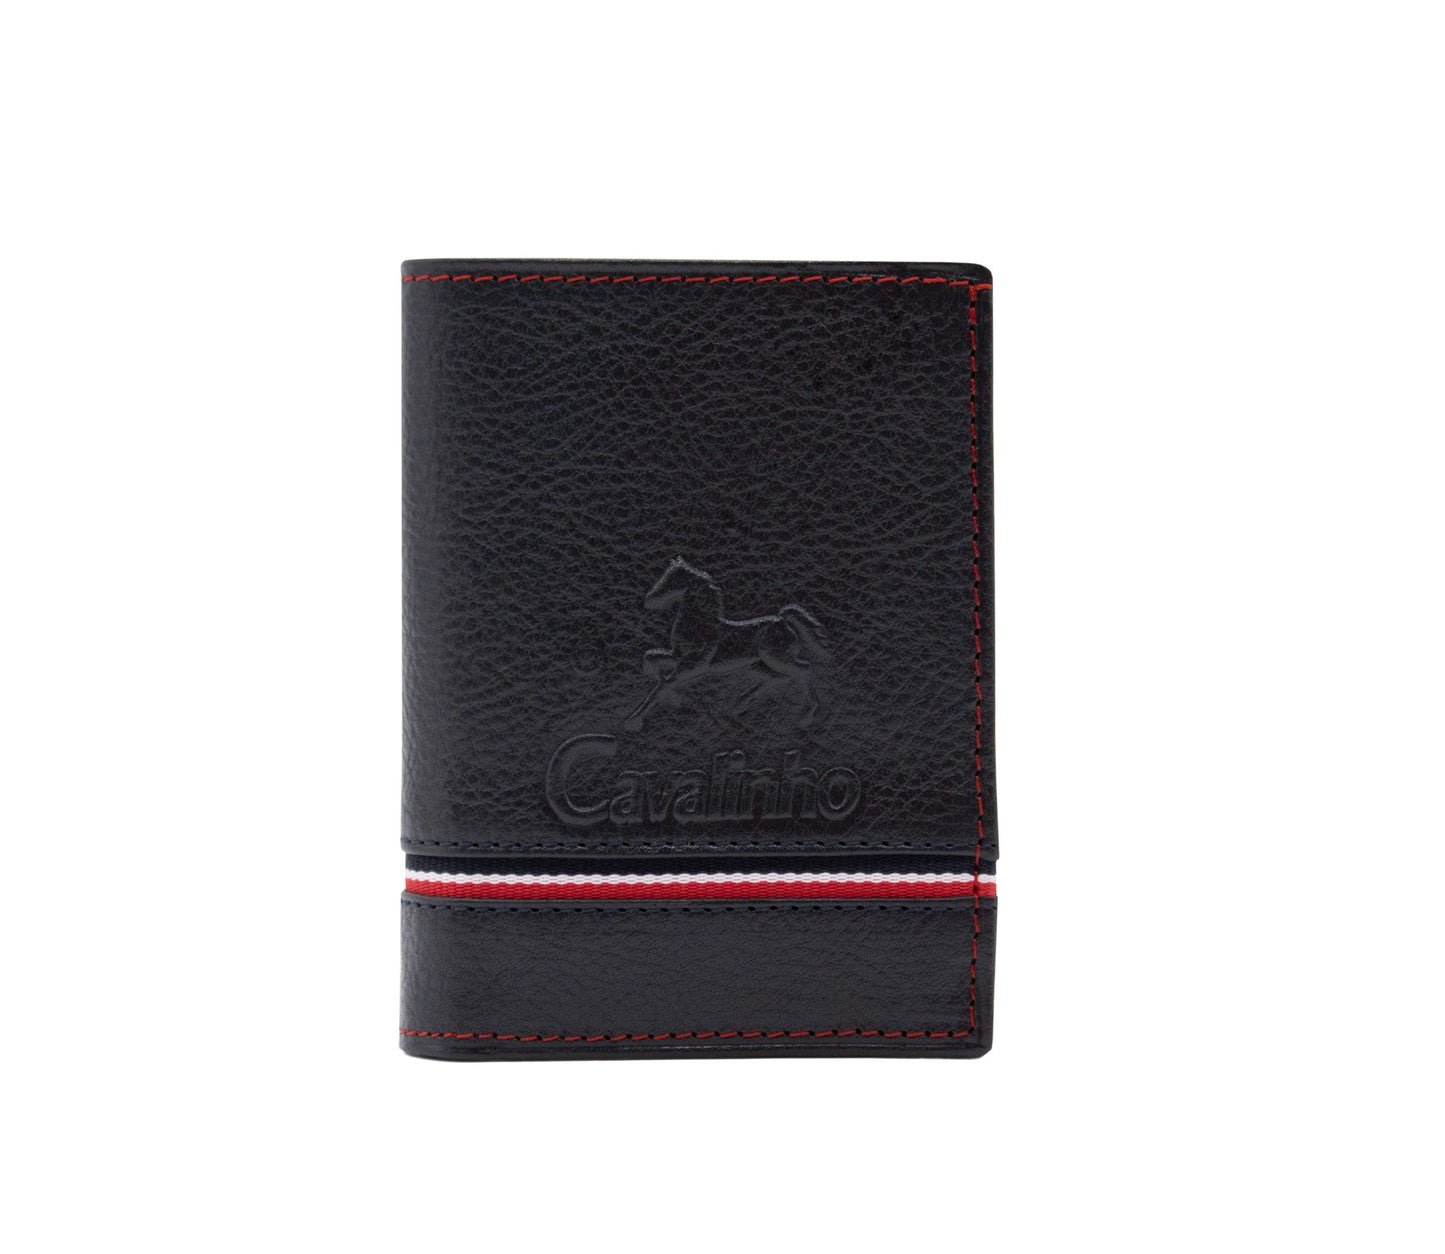 #color_ Navy | Cavalinho The Sailor Trifold Leather Wallet - Navy - 28150522.22_1